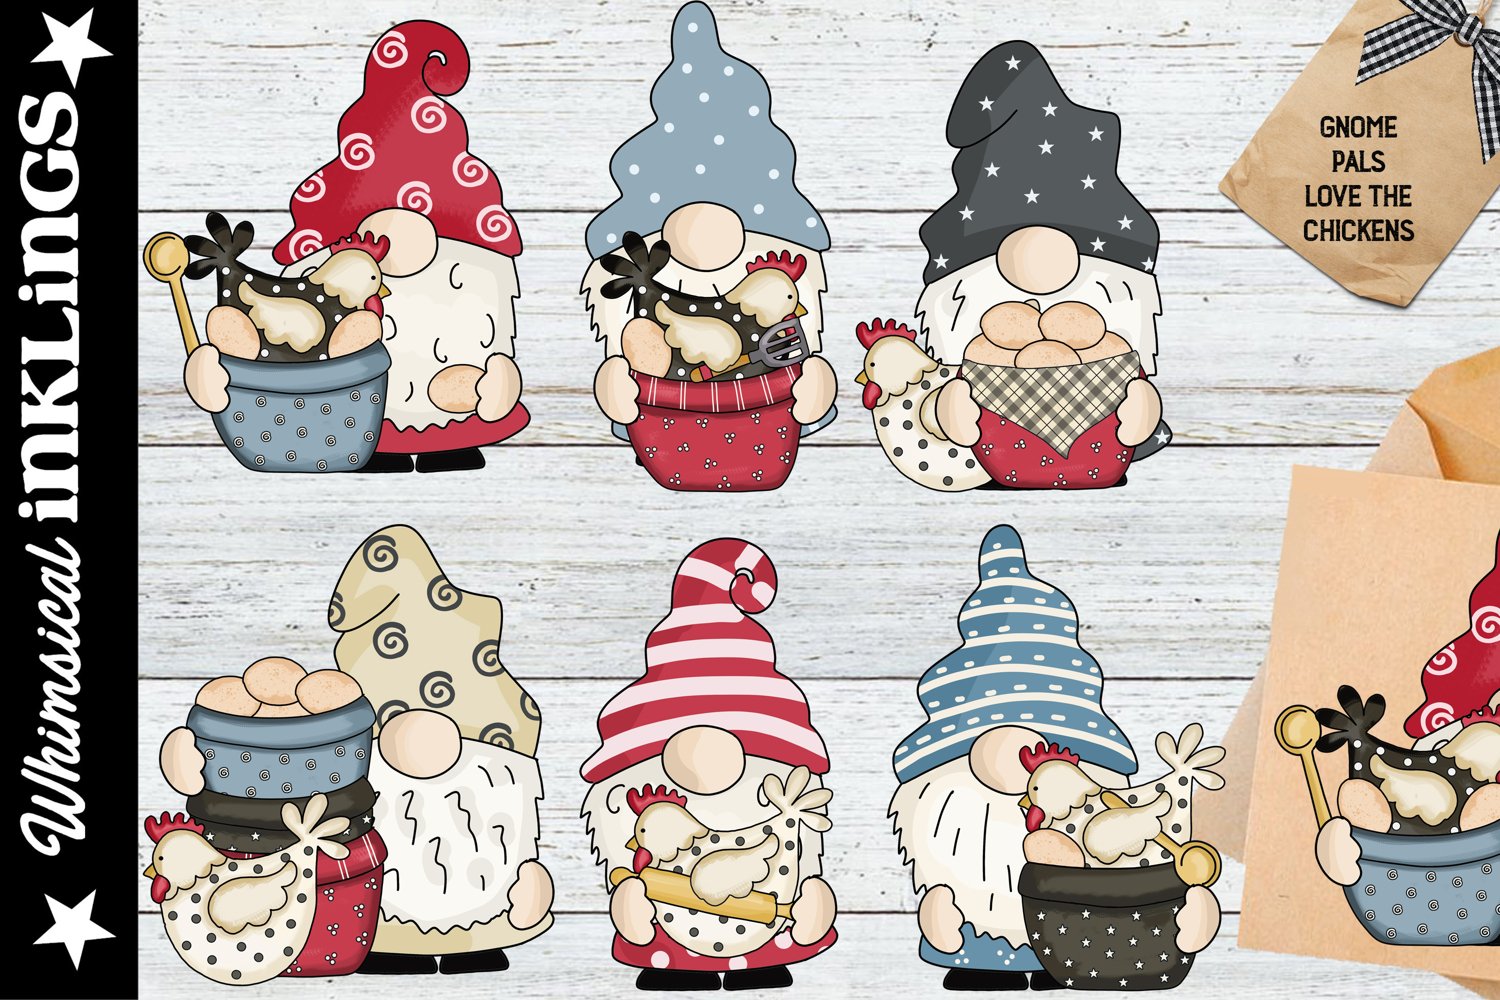 Gnome pals with chickens.